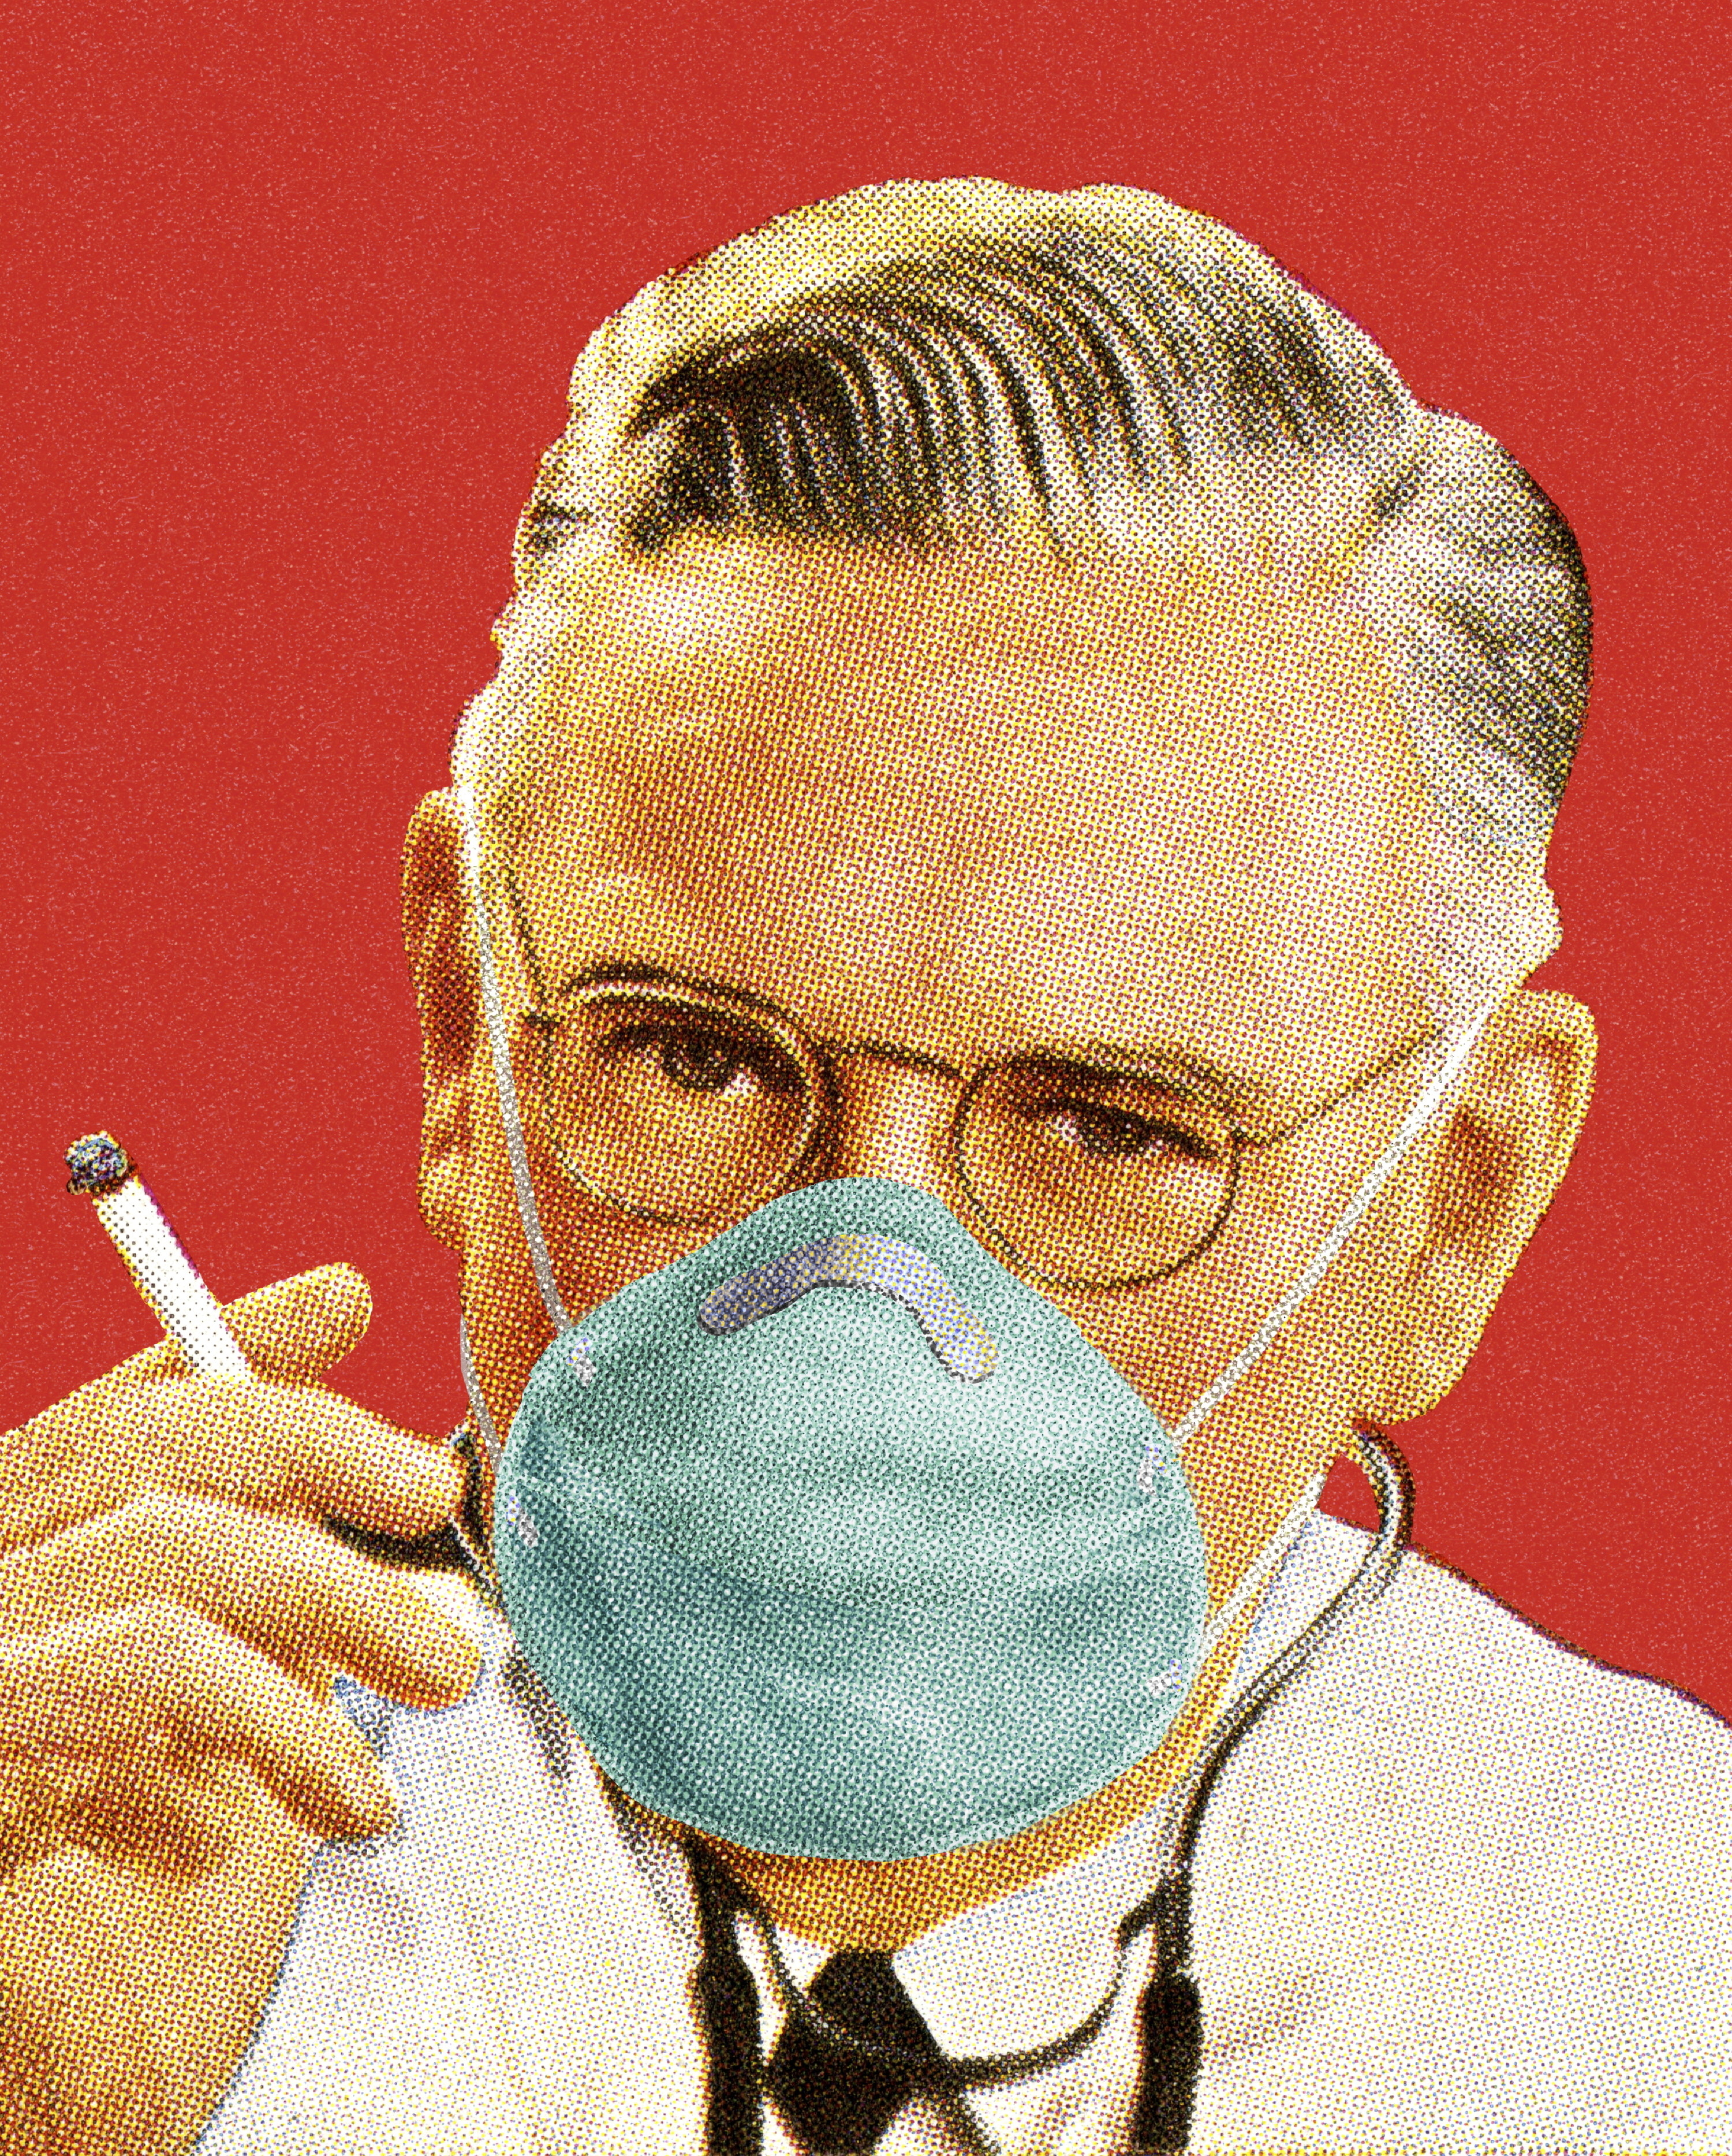 An old timey picture of a doctor holding a cigarette and wearing a mask